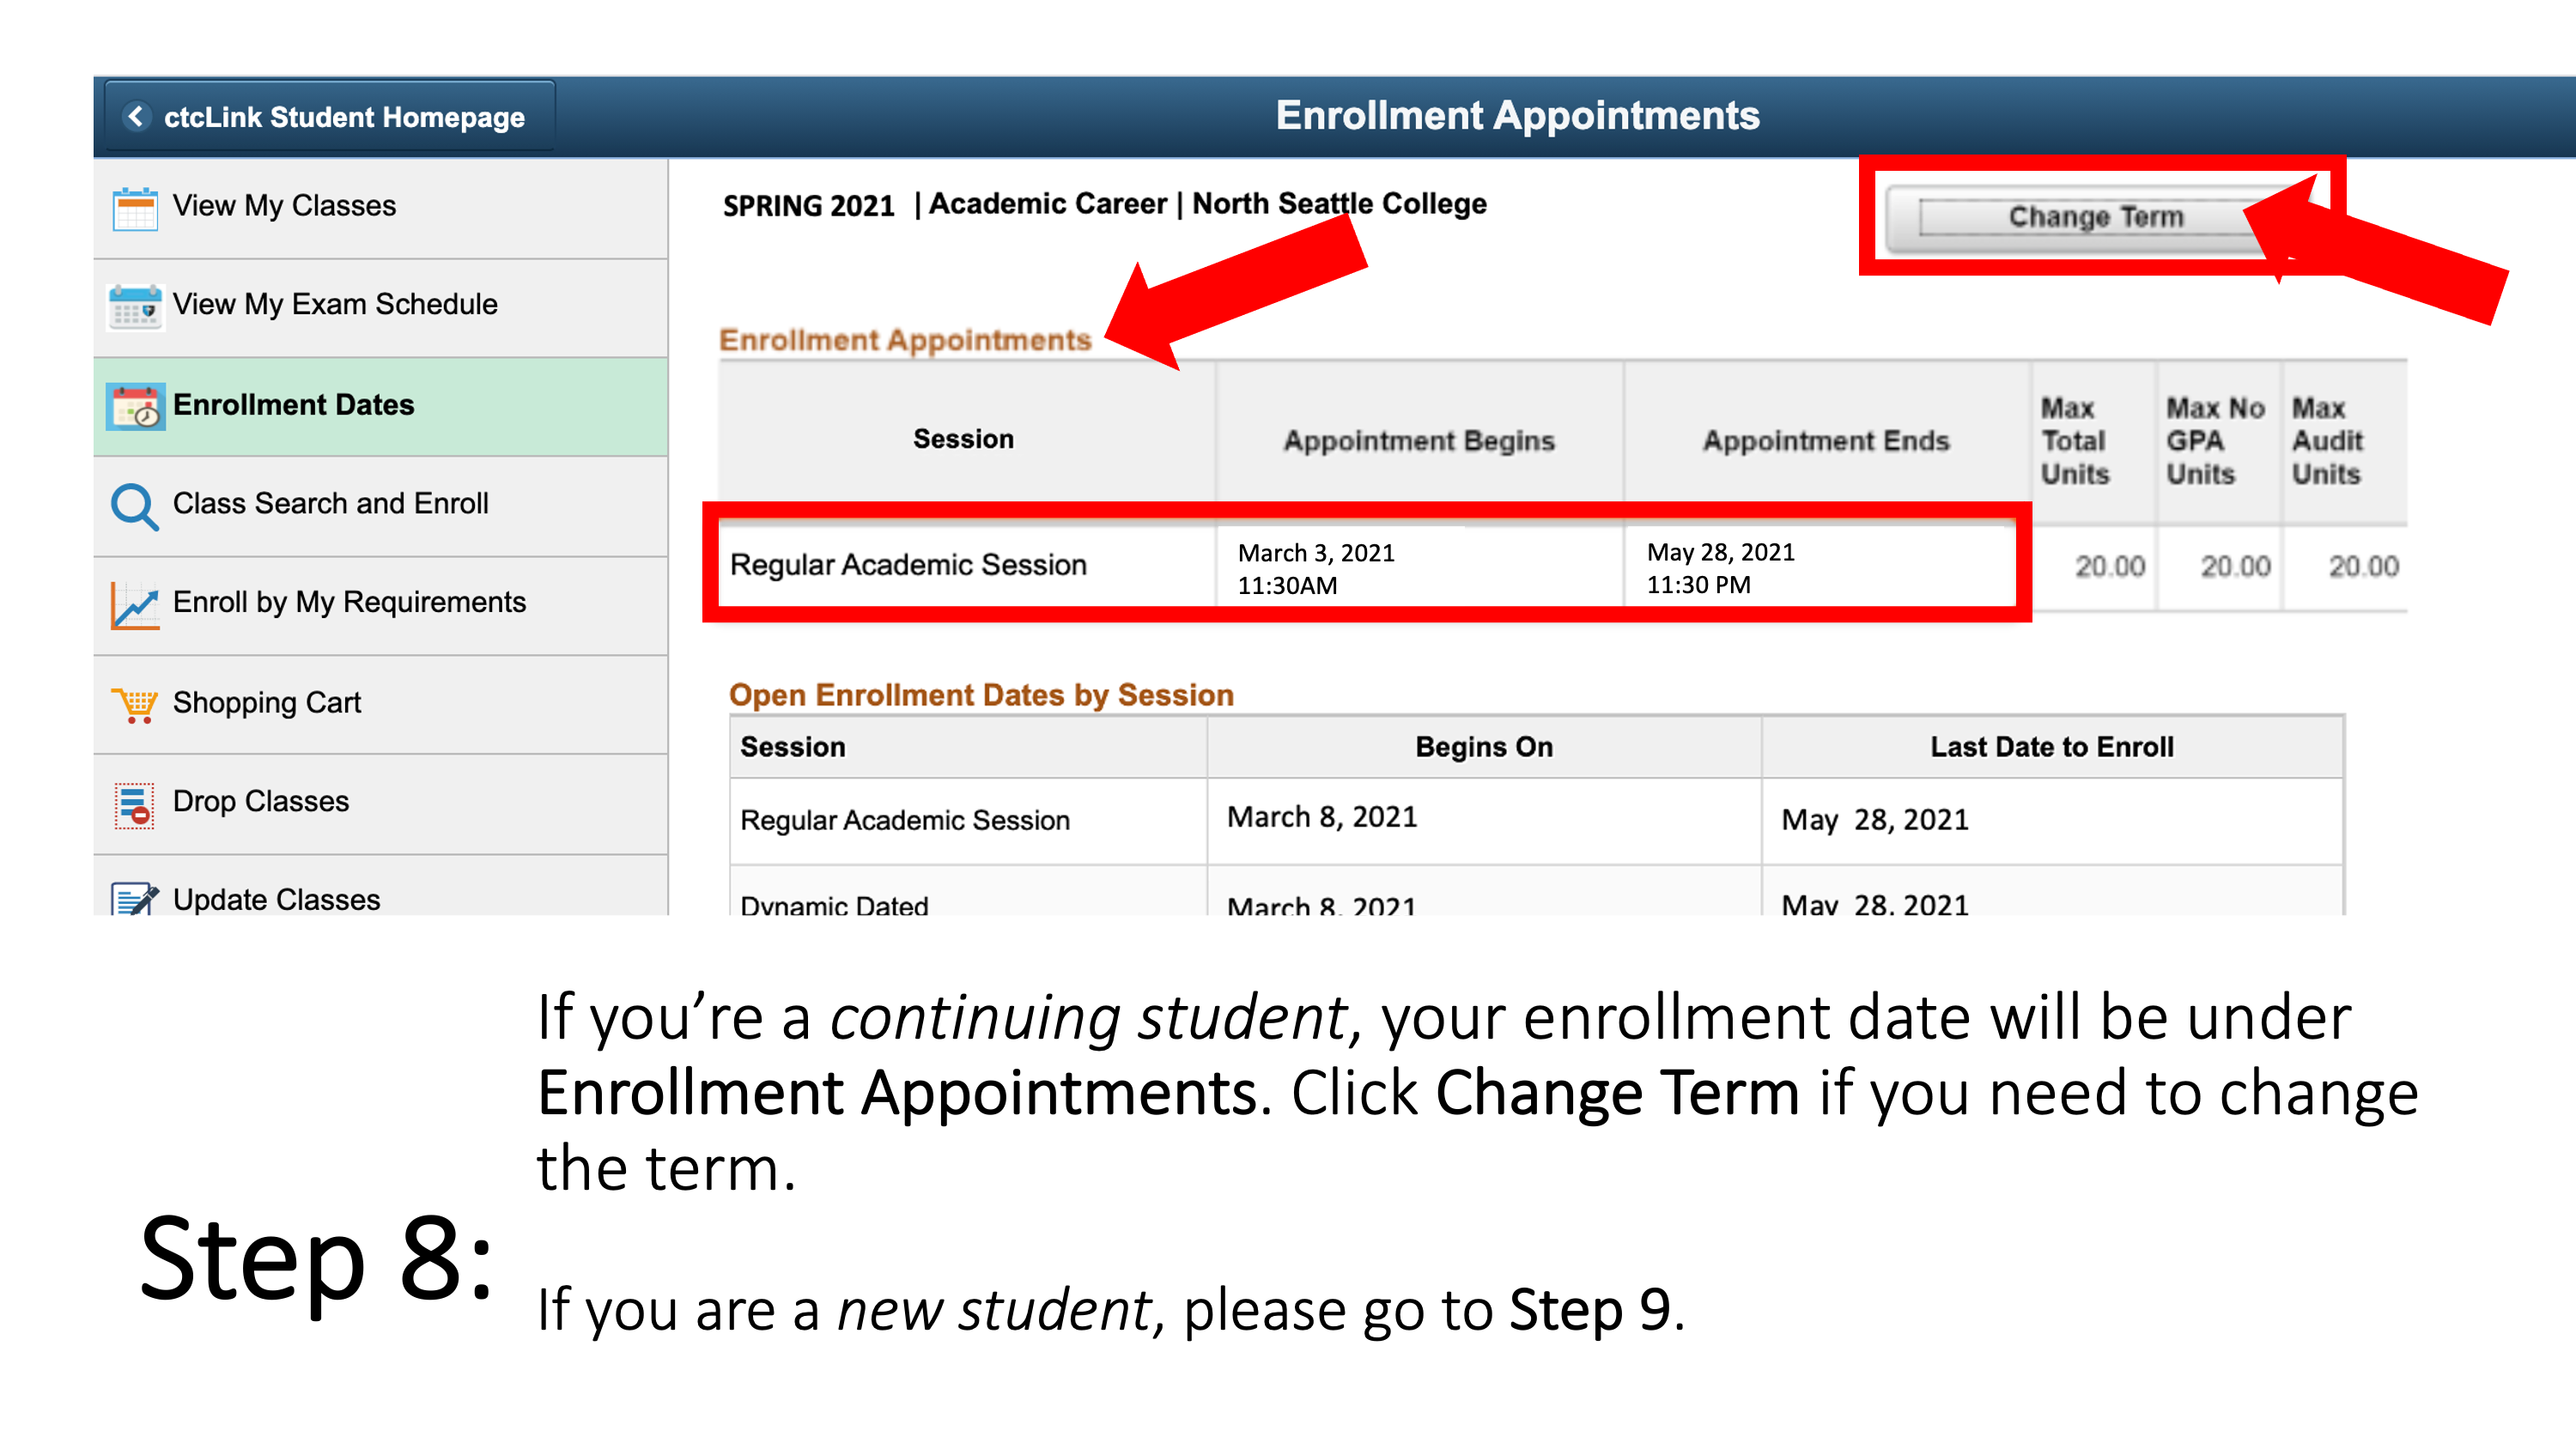  If you’re a continuing student, your enrollment date will be under Enrollment Appointments. Click Change Term if you need to change the term. If you are a new student, please go to Step 9.